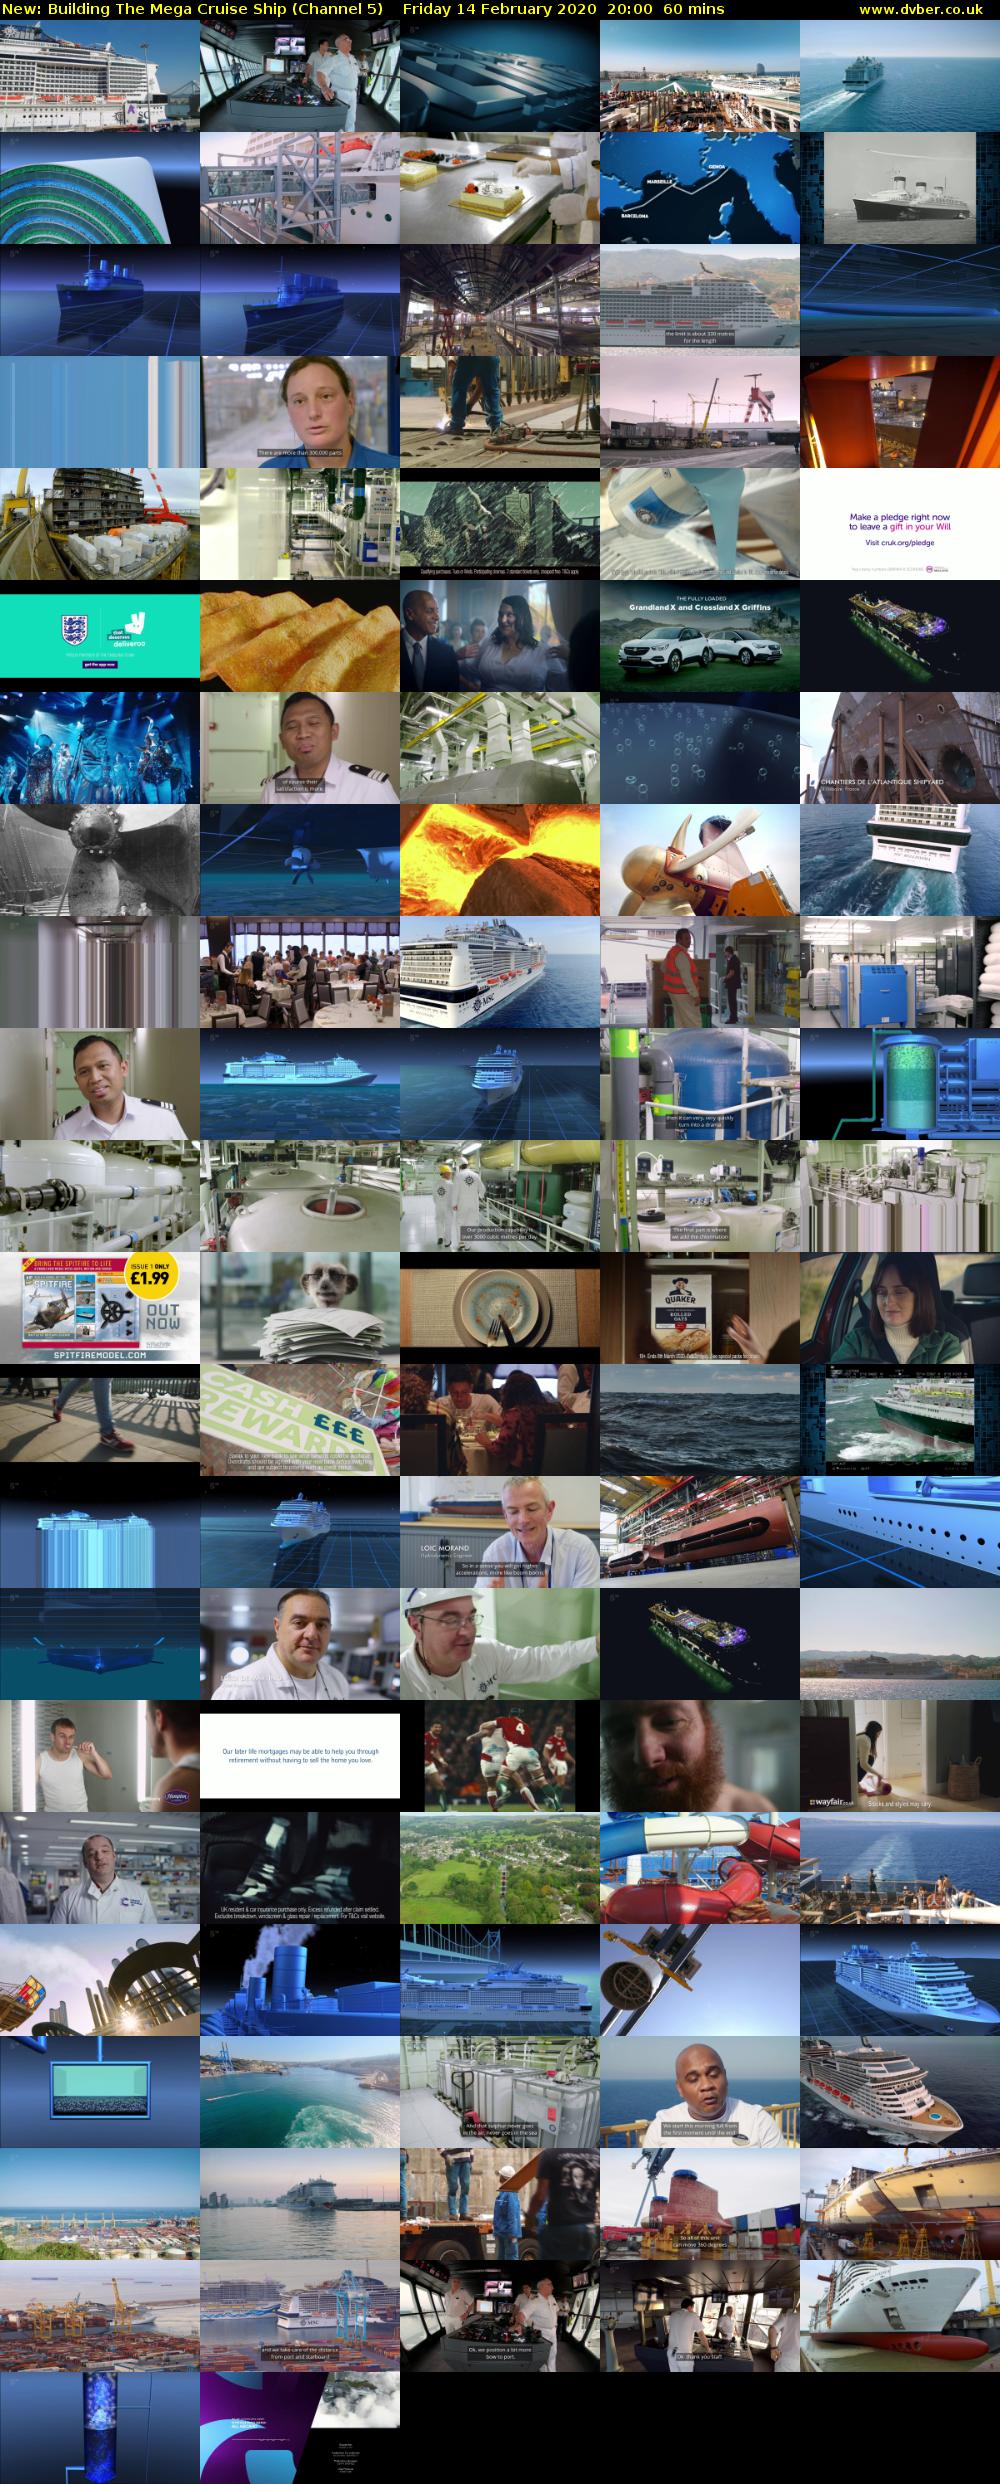 Building The Mega Cruise Ship (Channel 5) Friday 14 February 2020 20:00 - 21:00